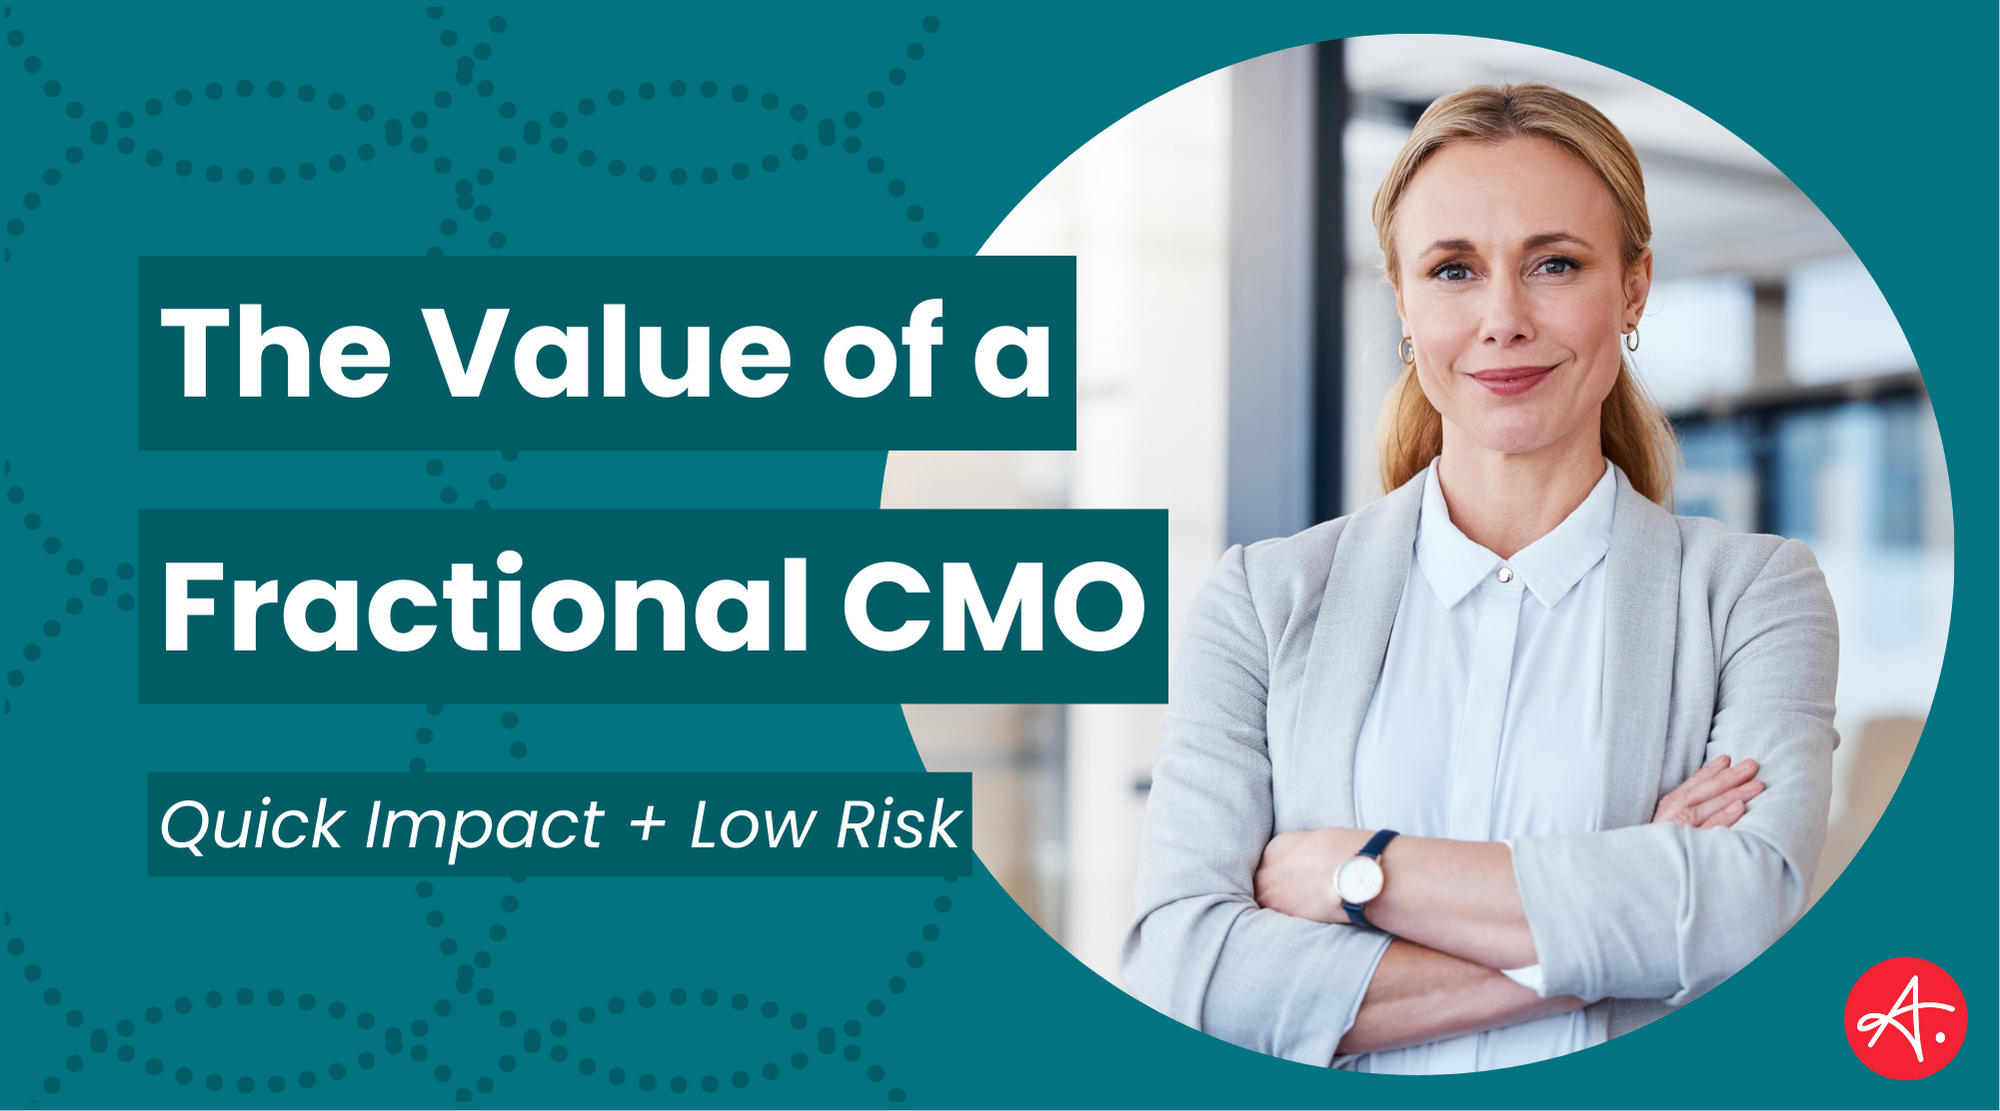 The value of a fractional CMO: Quick impact and low risk